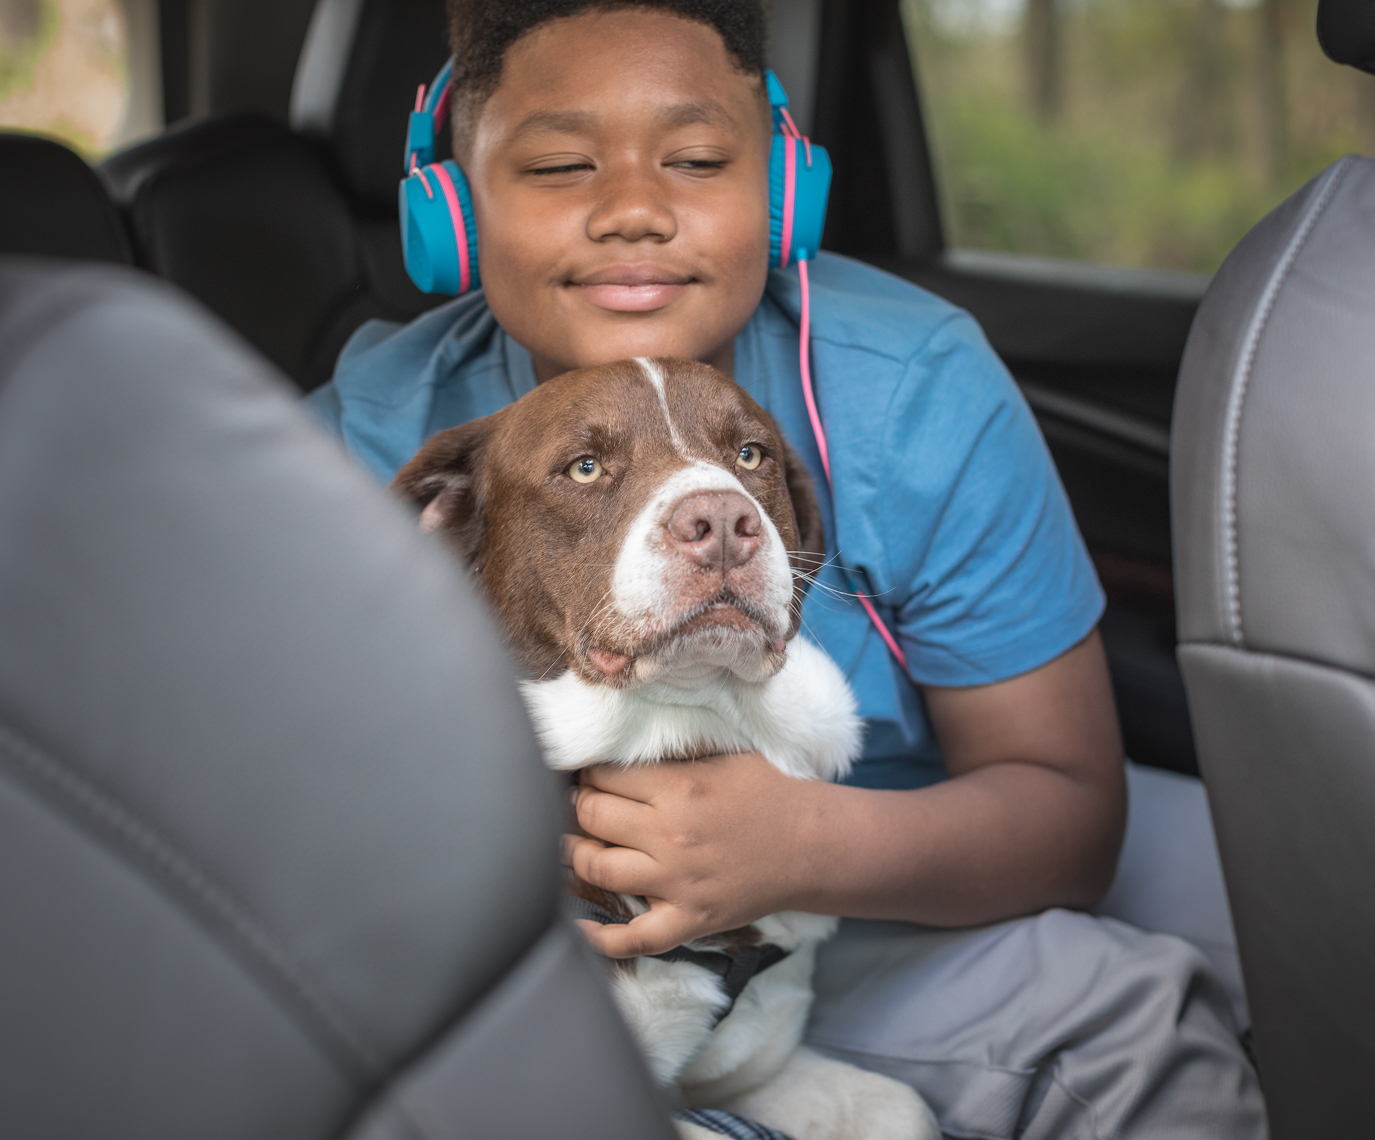 Lifestyle Photography by Jason Risner of a Boy and Rescue Dog For Valero